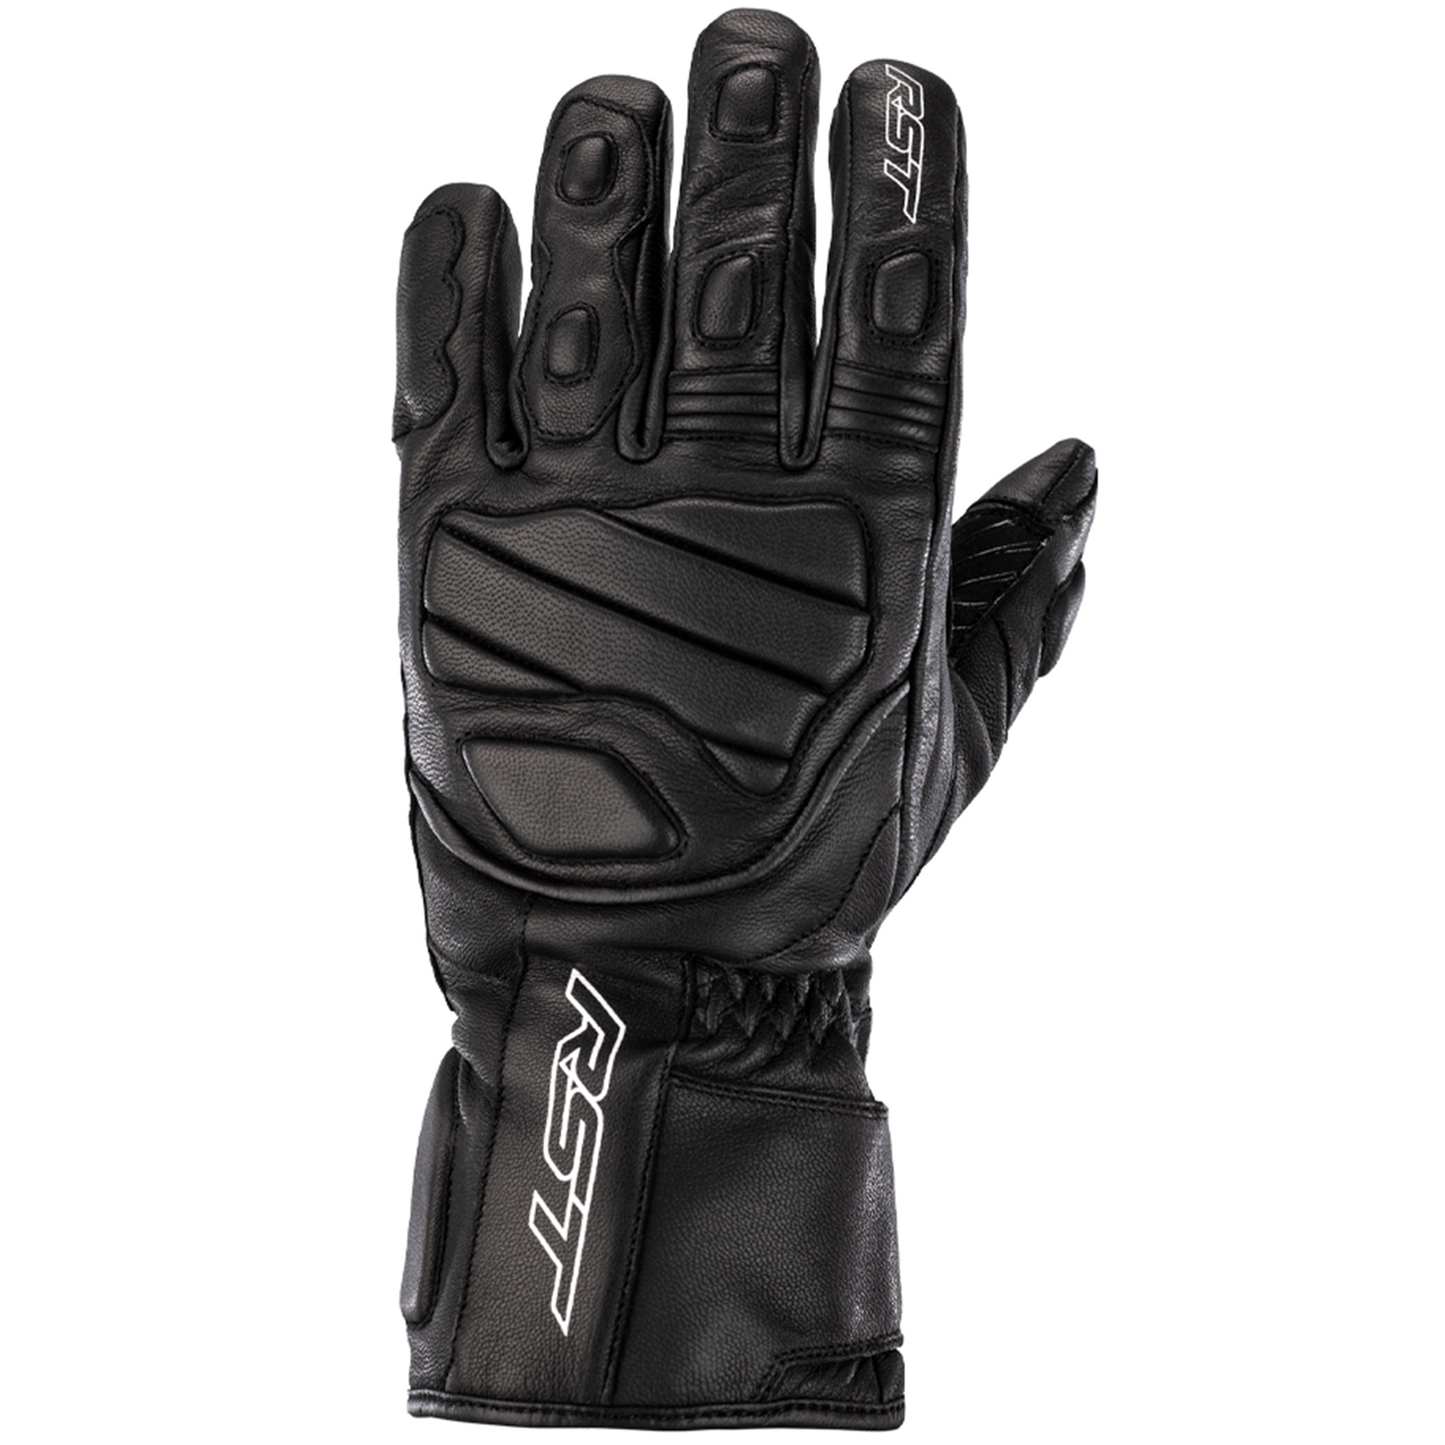 RST Turbine Waterproof Leather Riding Gloves - CE APPROVED - Black